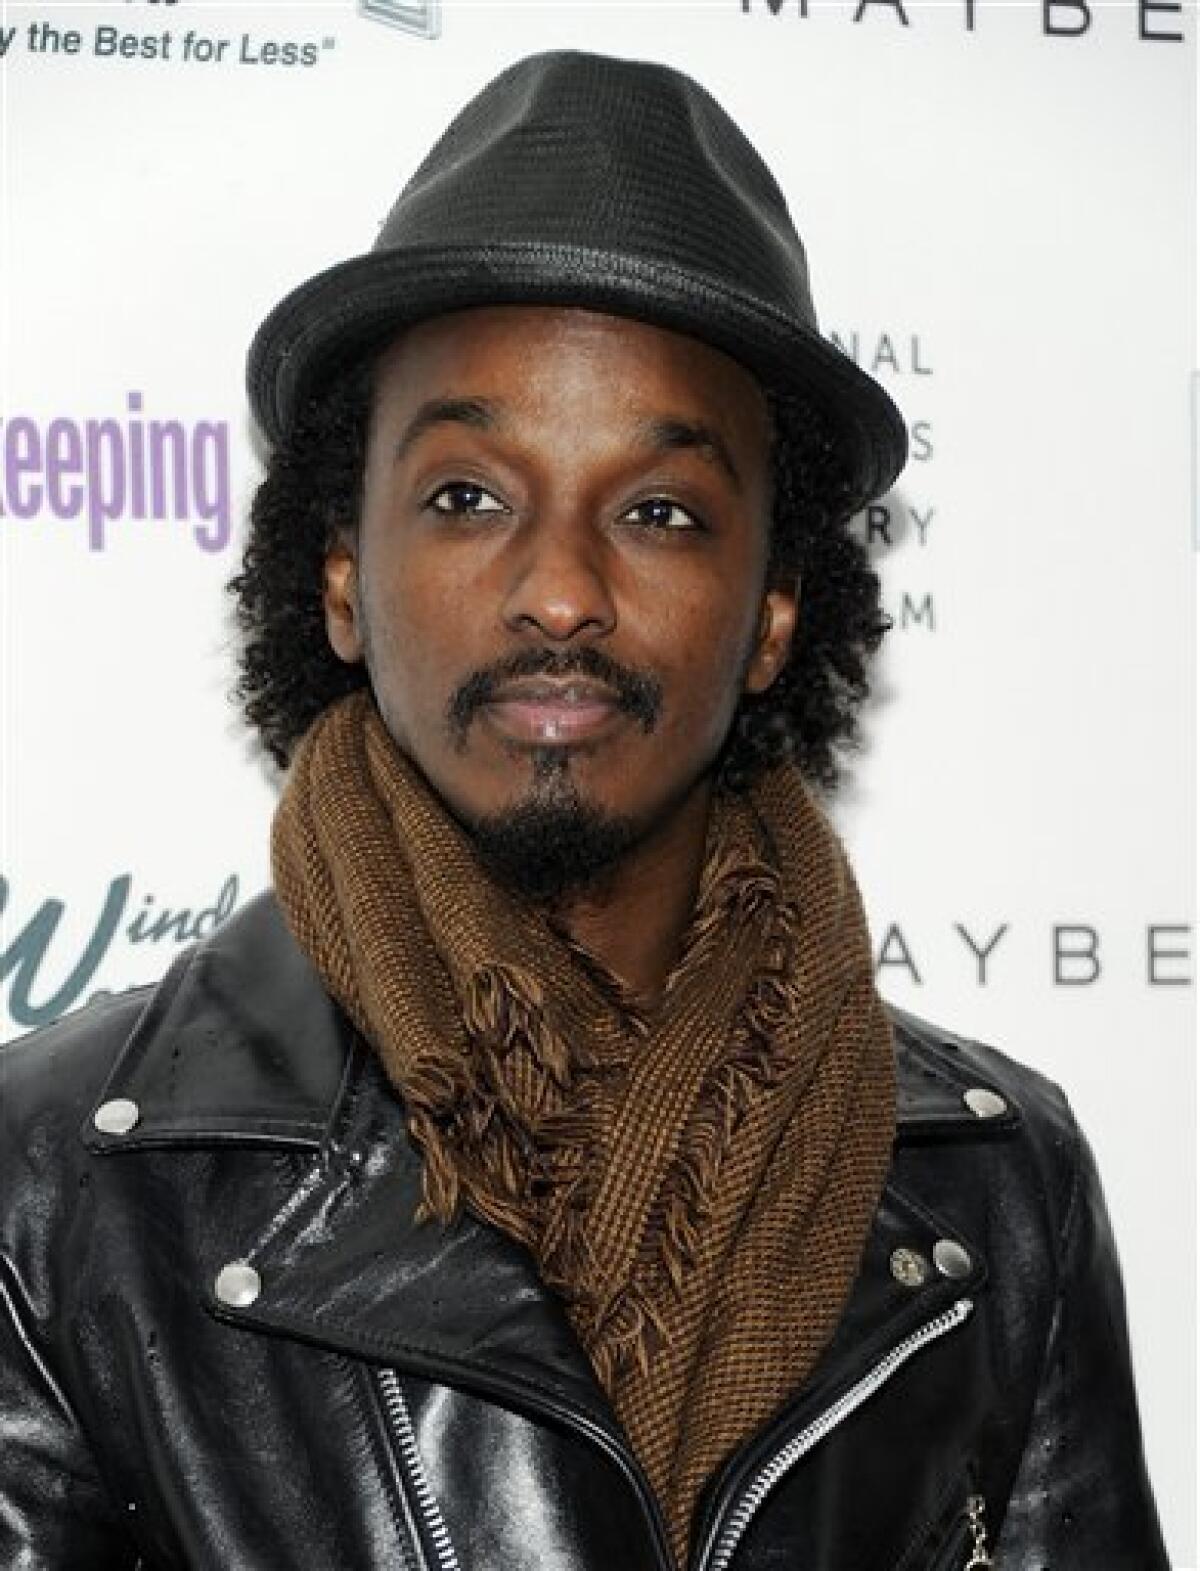 FILE - In this April 12, 2011 file photo, musician K'Naan attends Good Housekeeping's "Shine On" Women Making History theatrical event at Radio City Music Hall in New York. K'Naan is upset that Mitt Romney used his song “Wavin' Flag” during his speech Tuesday night, and the rapper is seeking legal action as a result. (AP Photo/Evan Agostini, file)